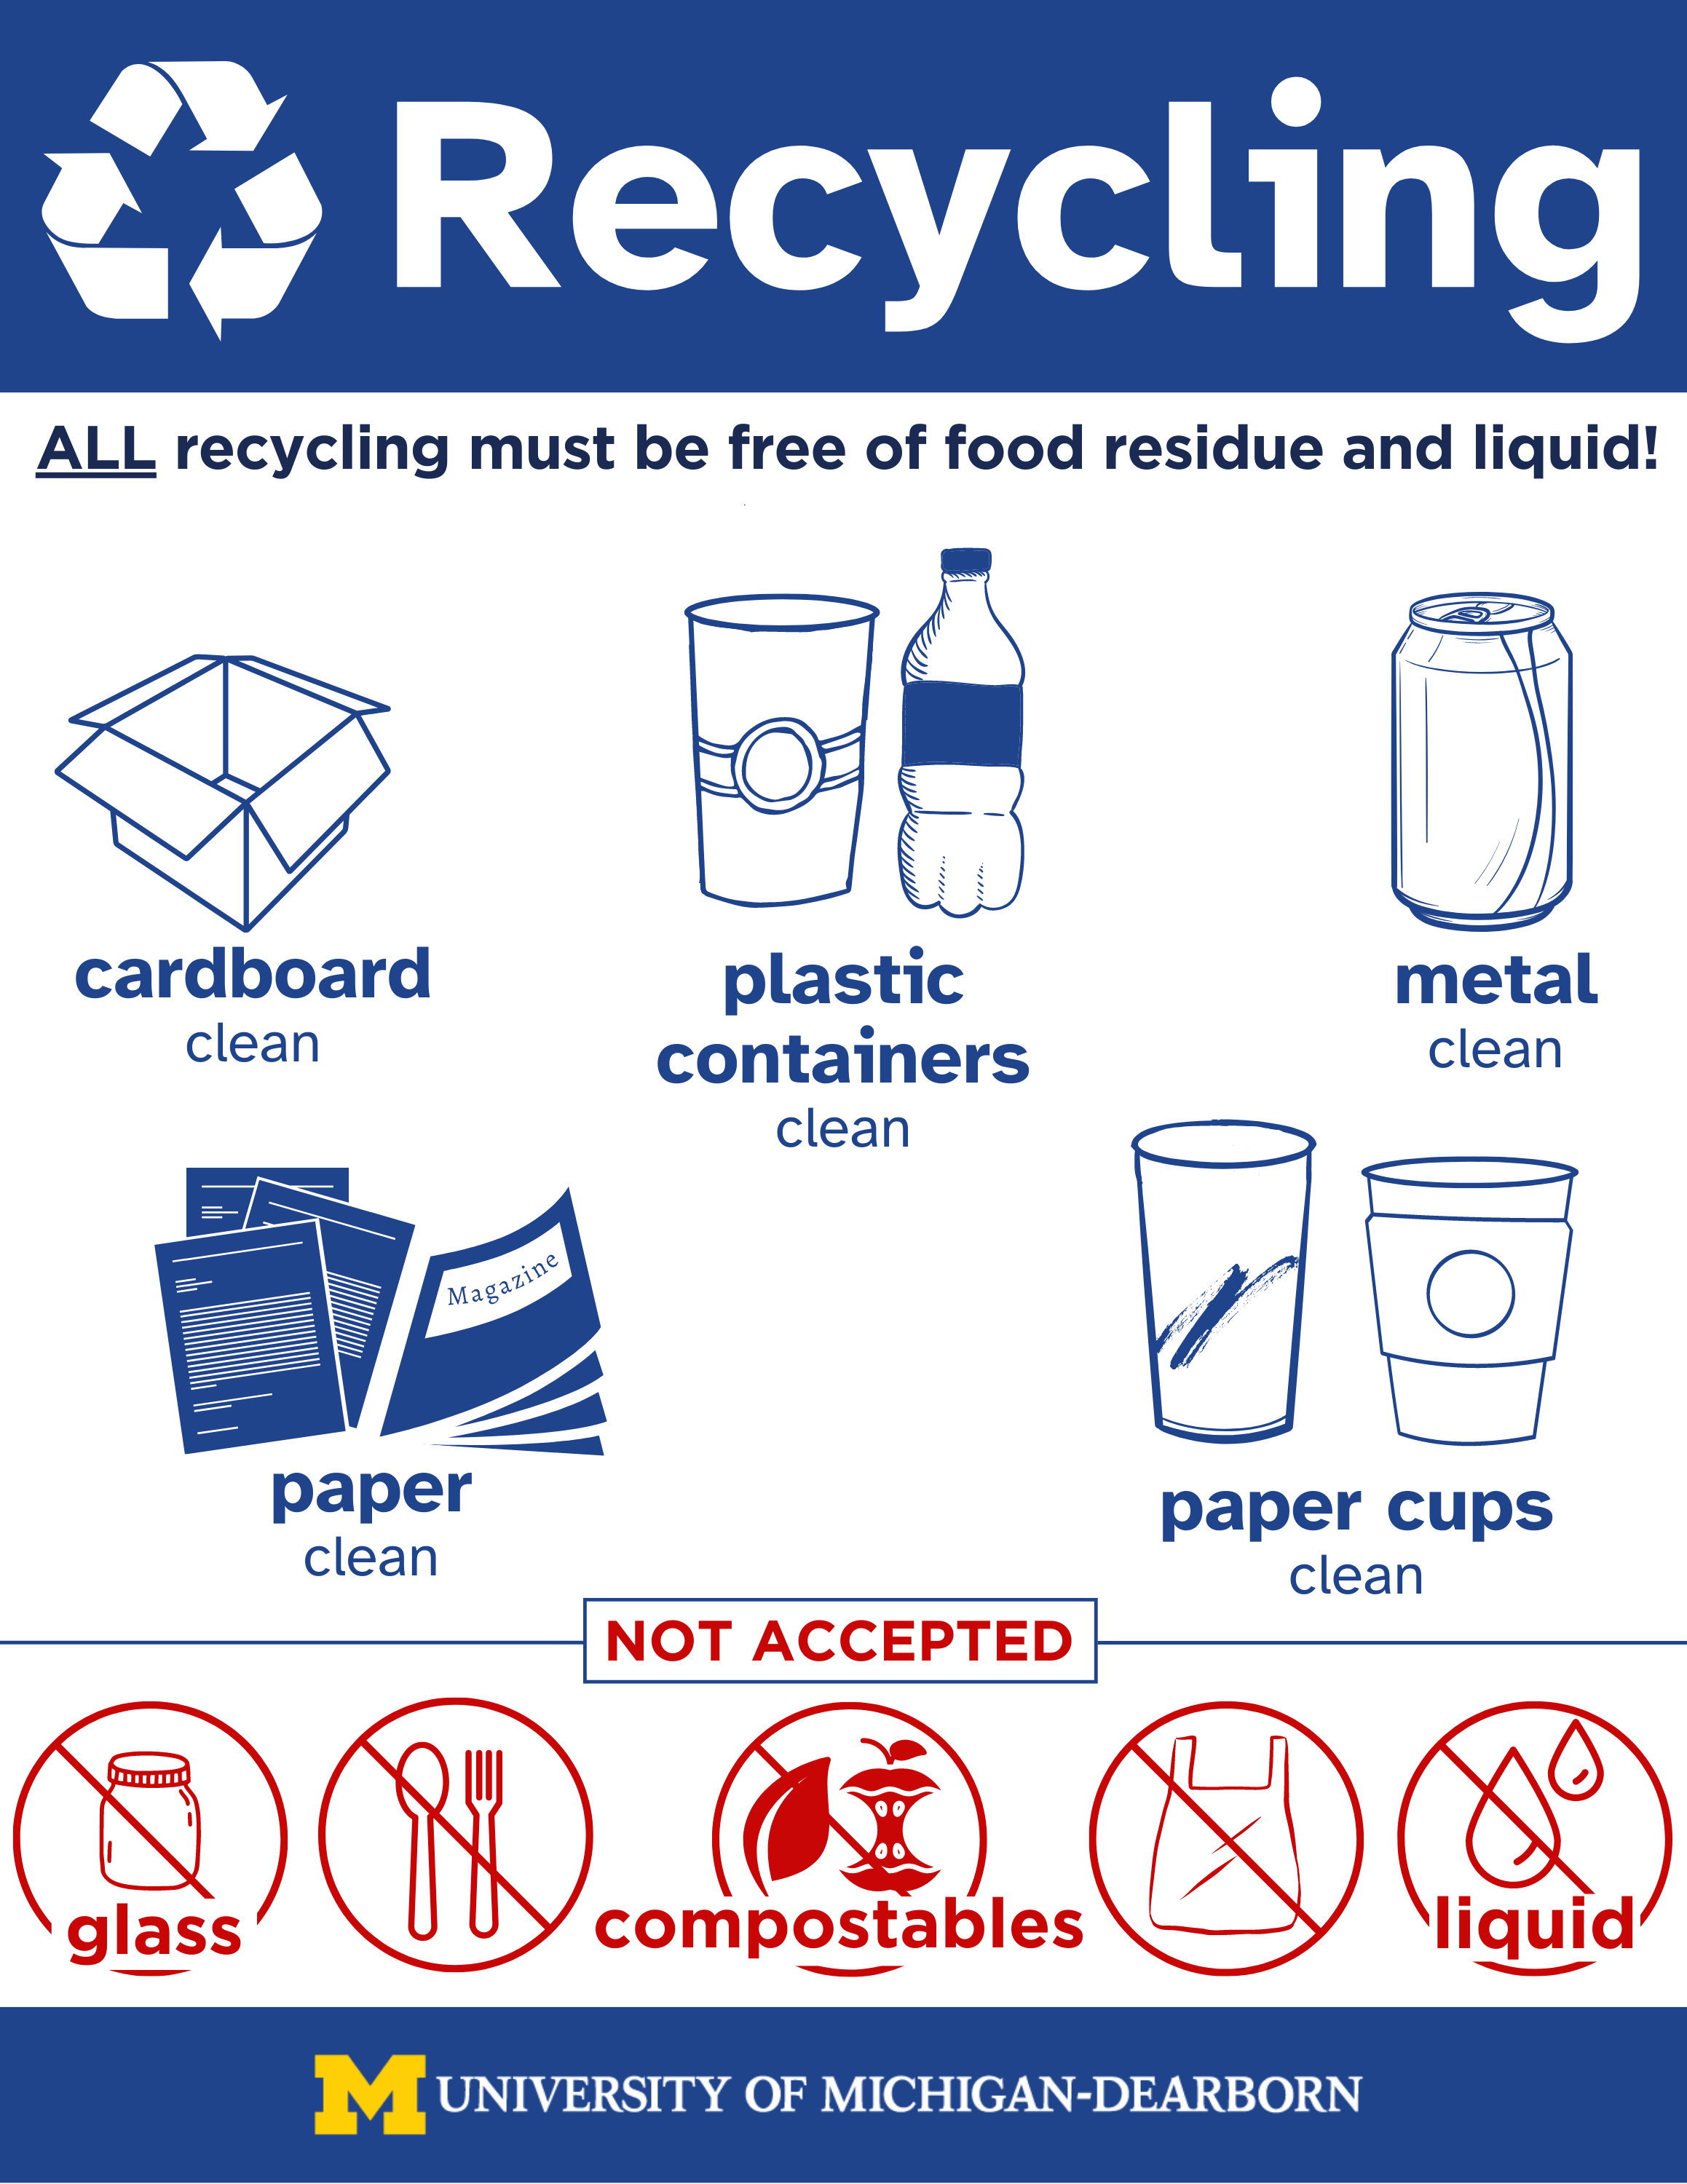 Campus wide recycling signage to inform public about what belongs in the recycling stream bin